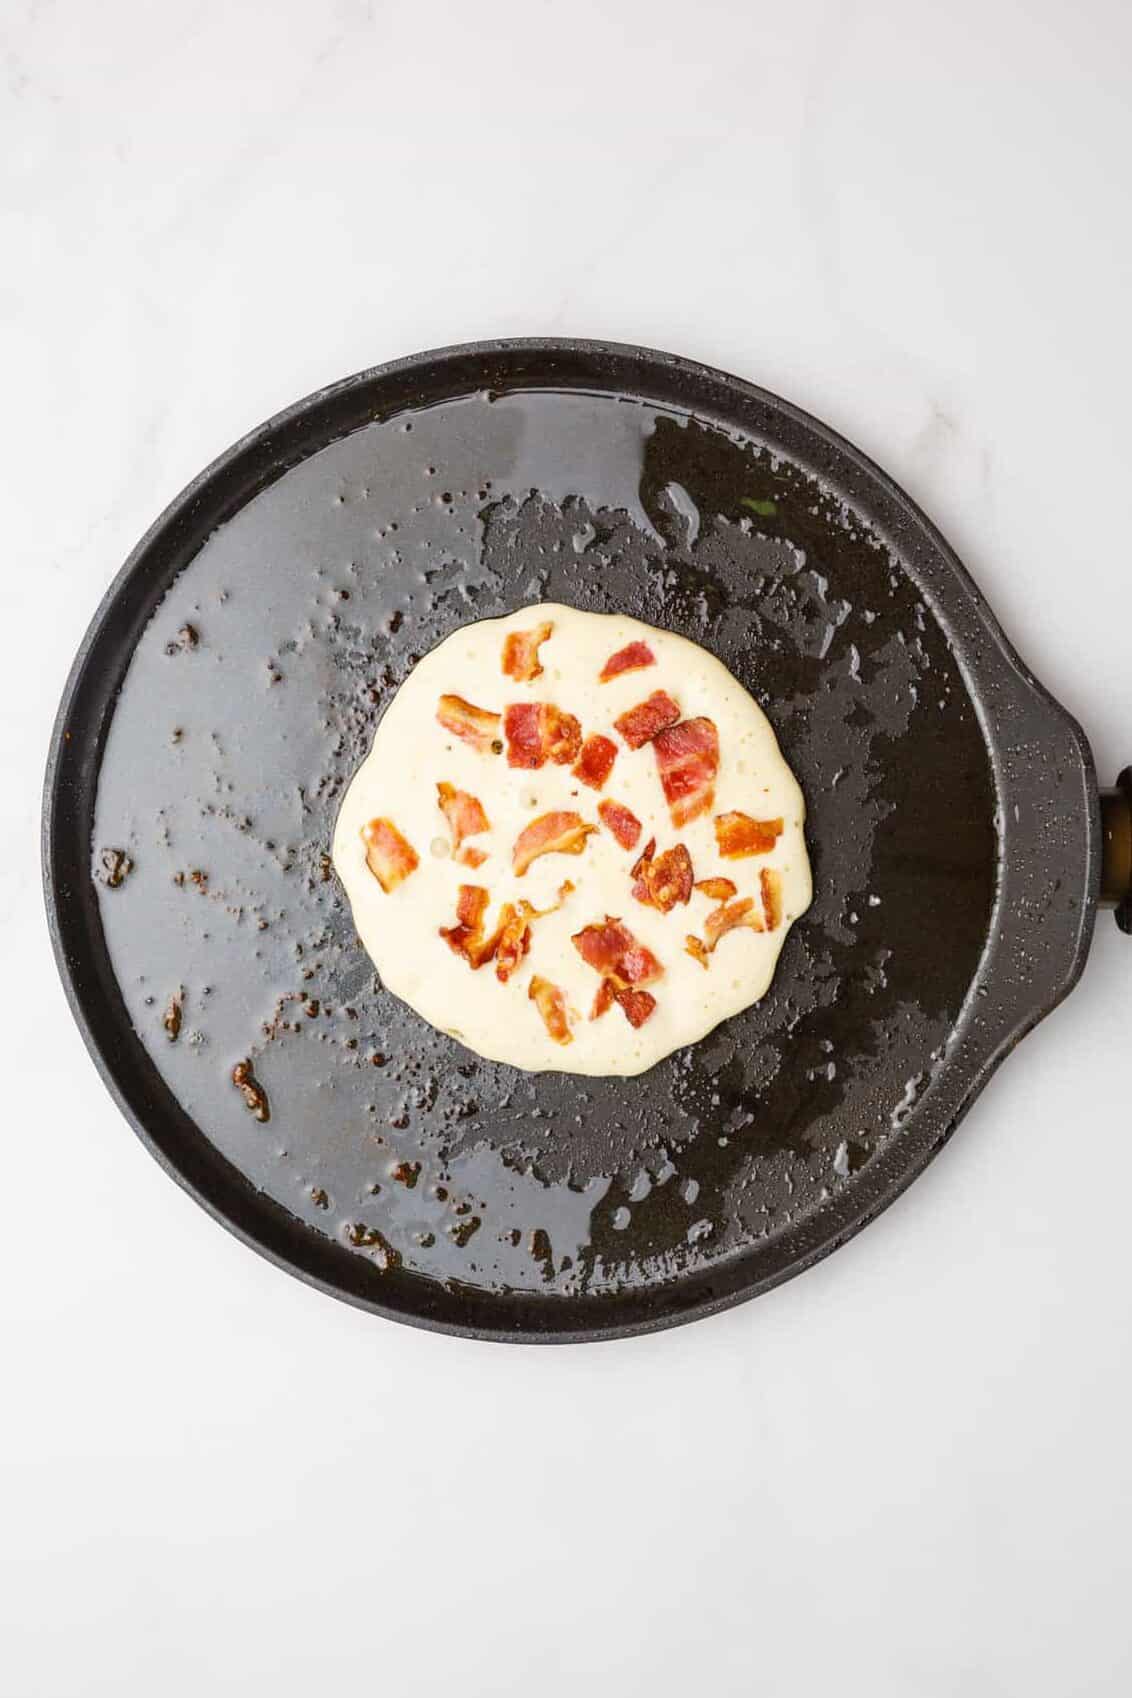 step 4 to make bacon pancakes, ladle down pancake batter in the same cast iron skillet and sprinkle the top with bacon